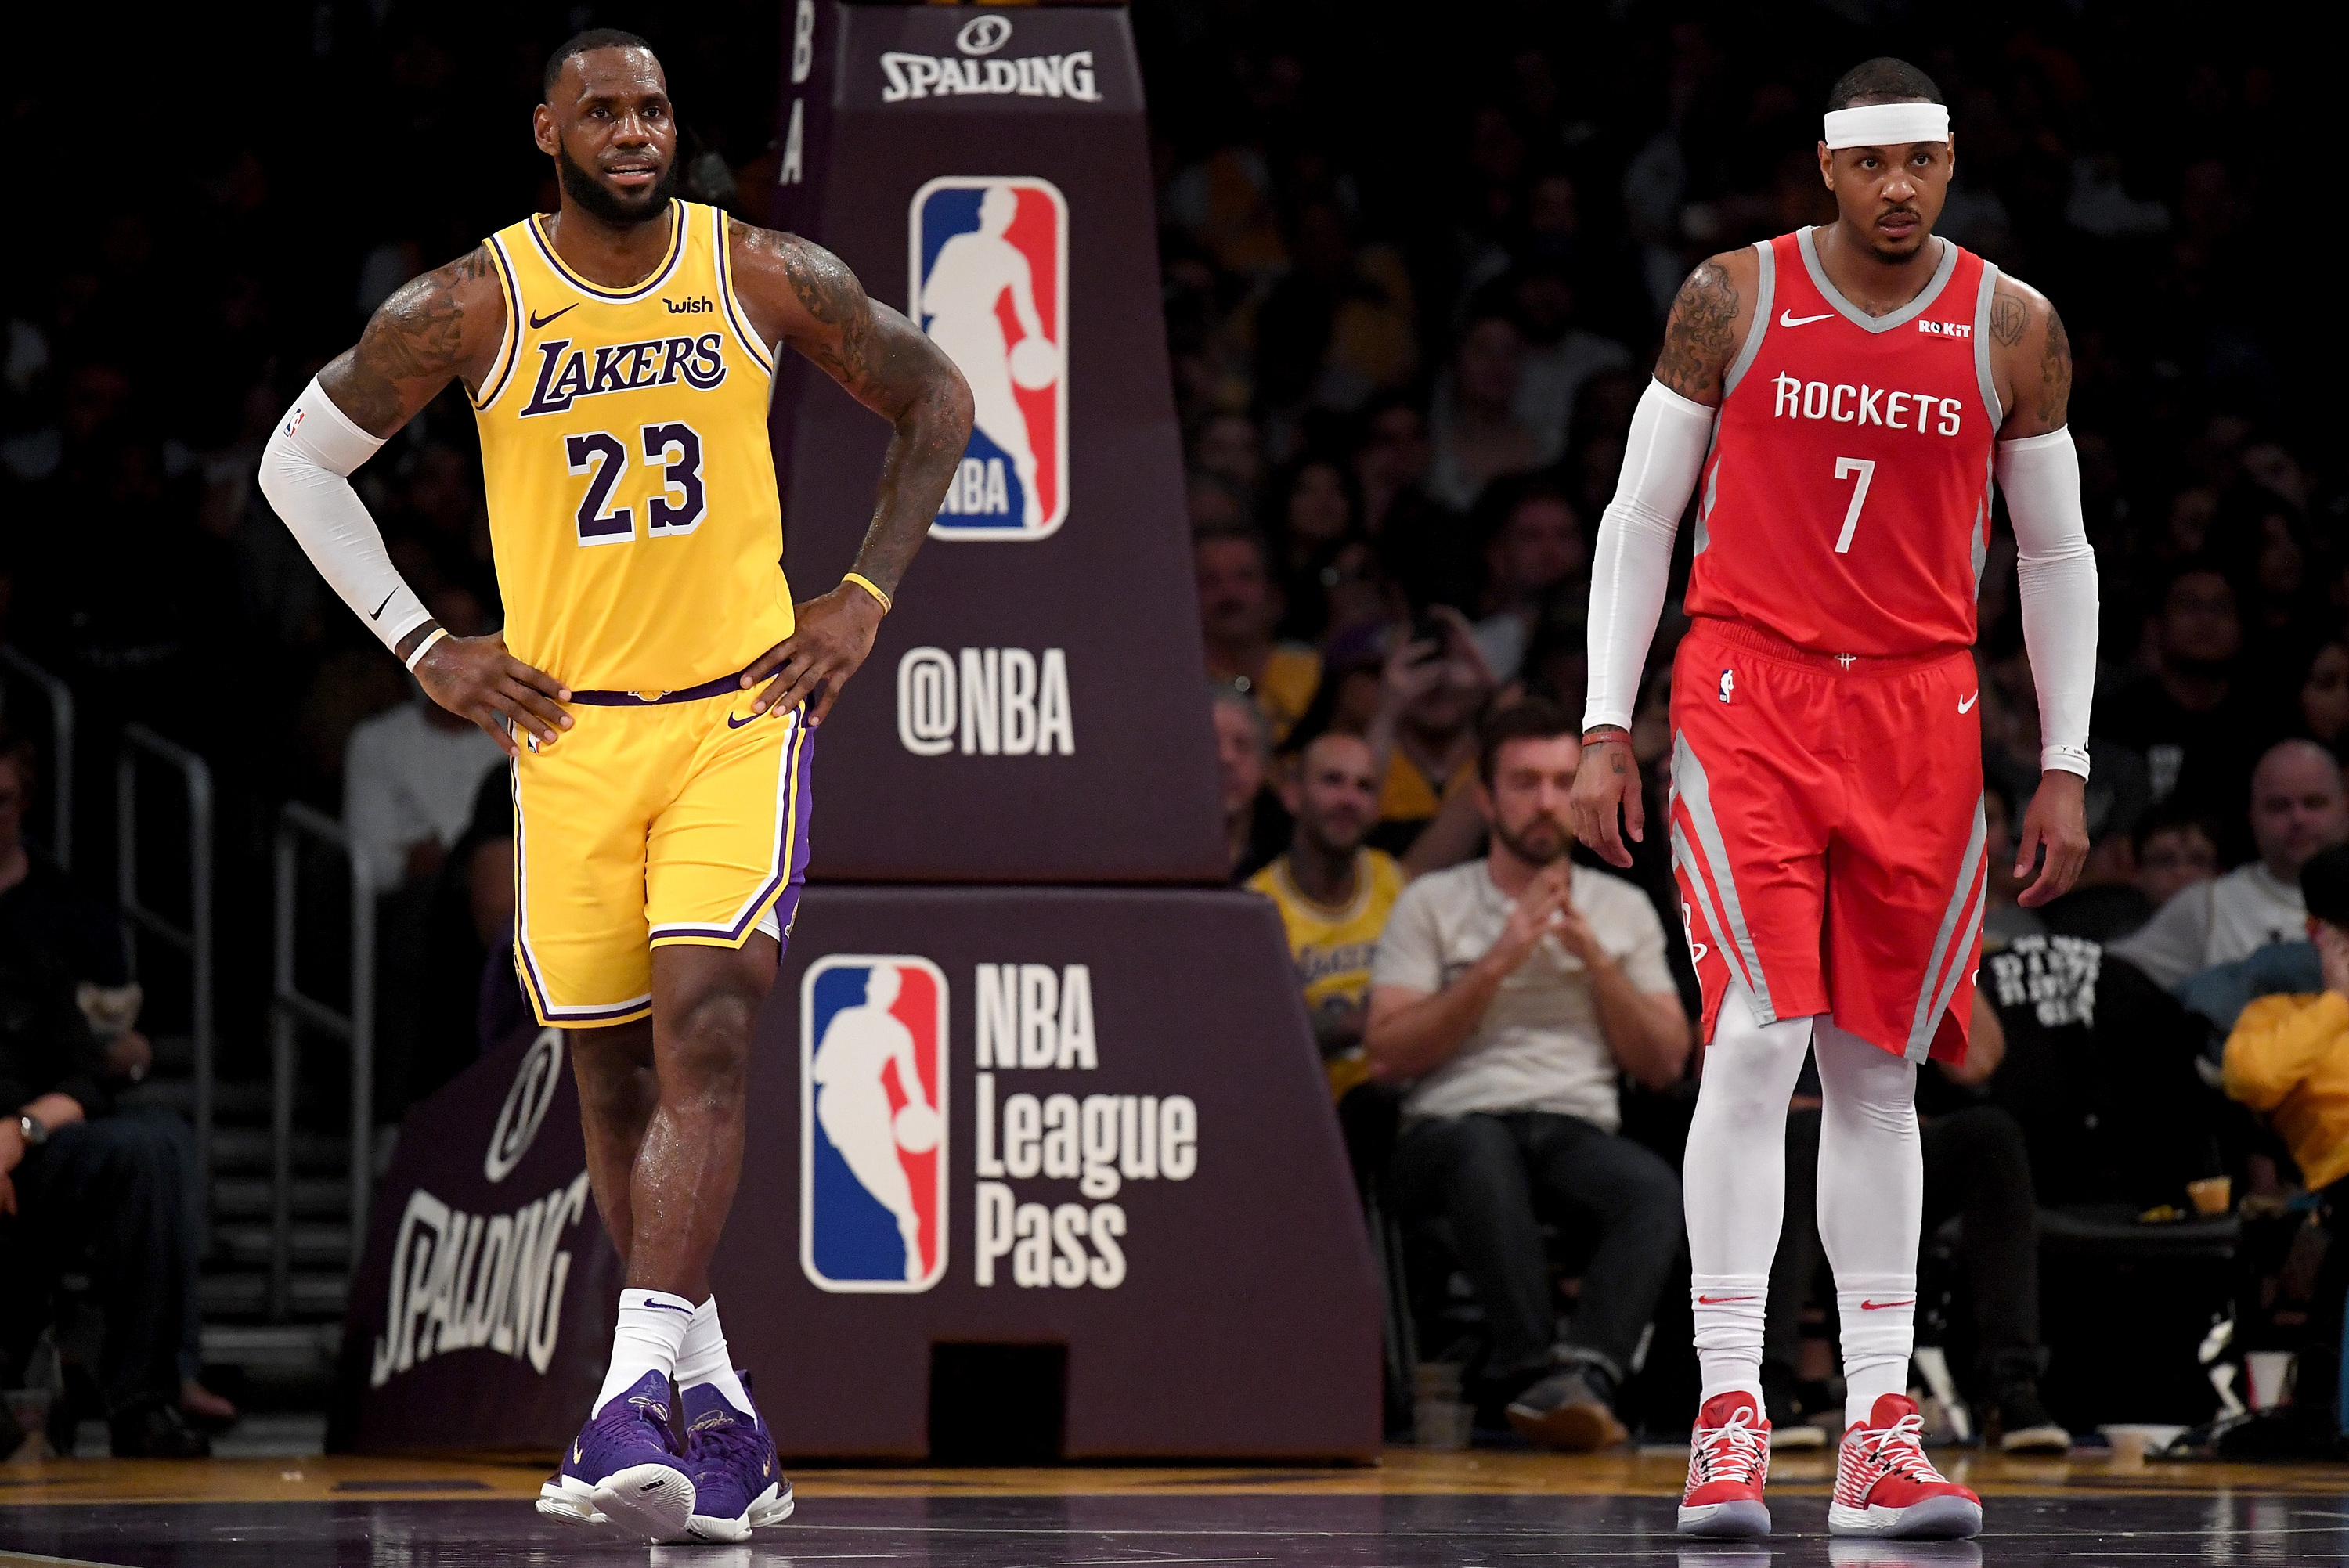 Carmelo Anthony on teaming up with LeBron James: 'I think it was